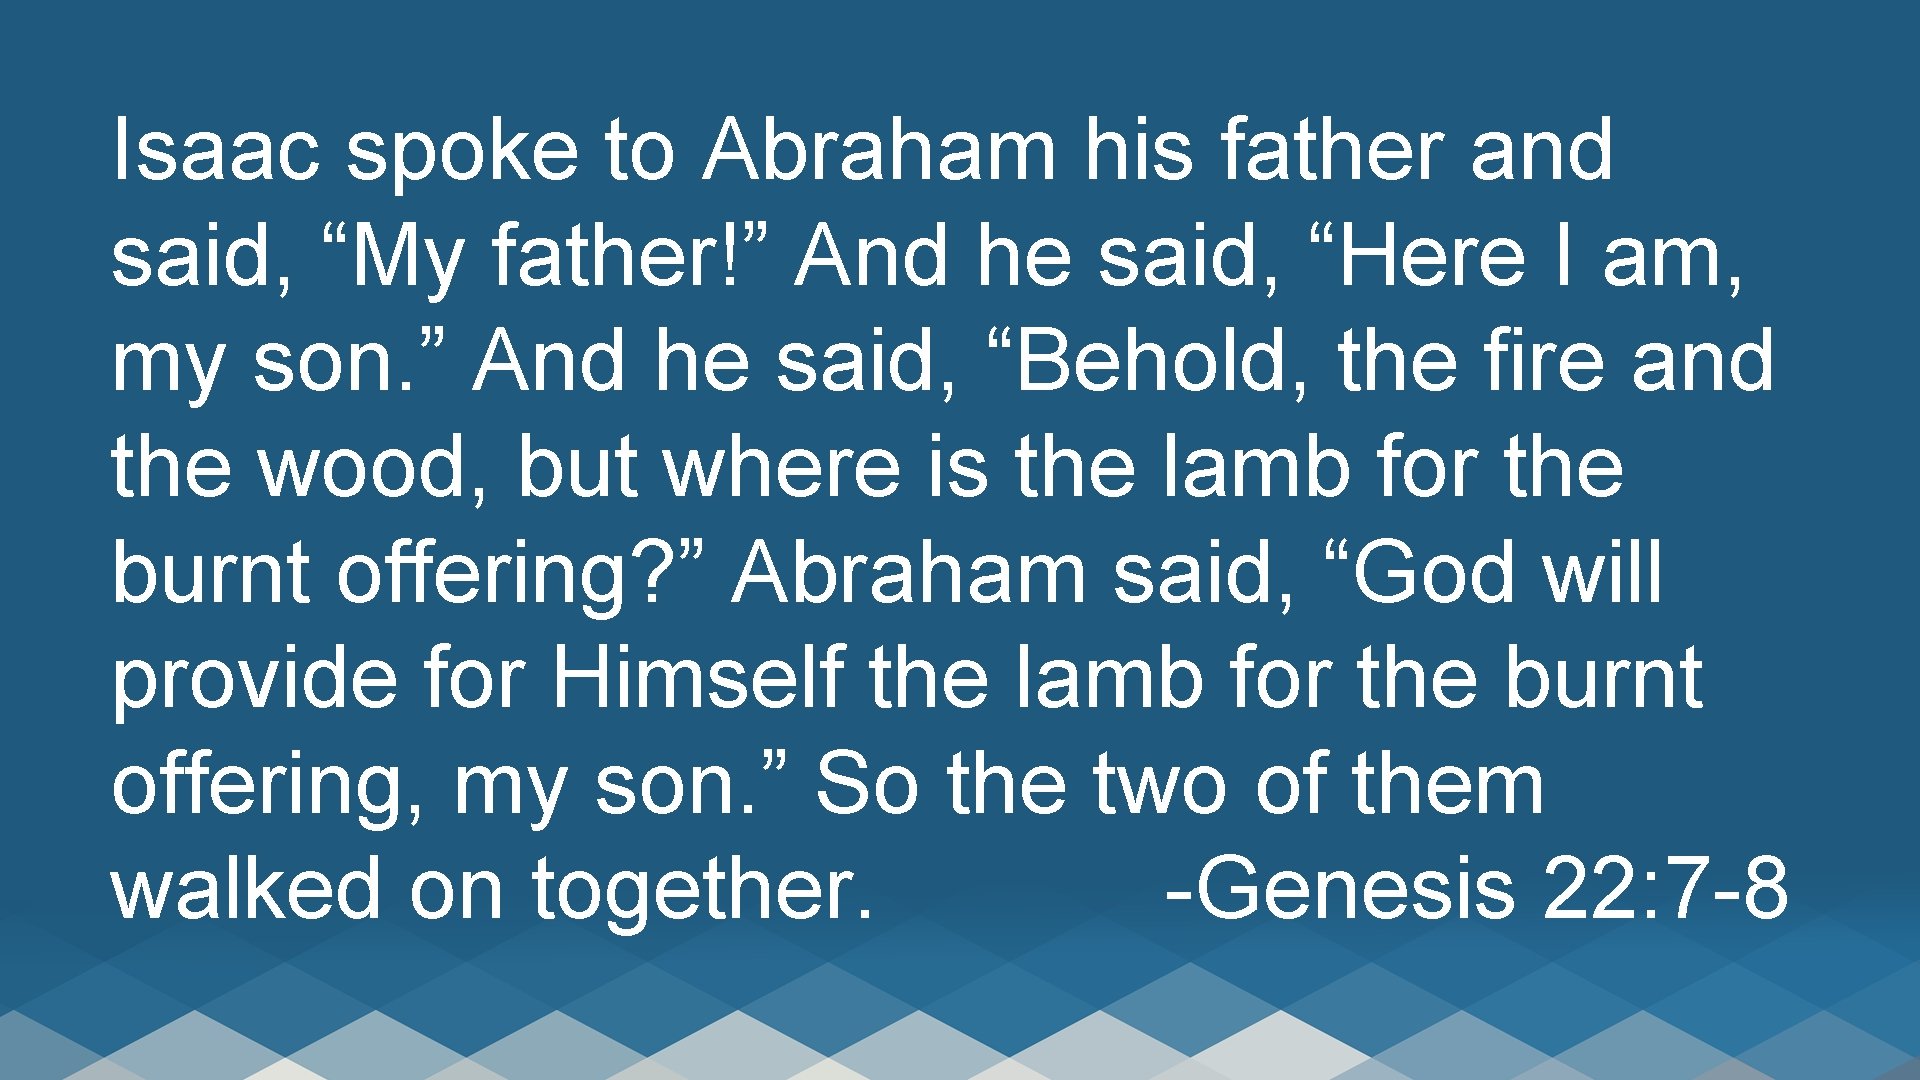 Isaac spoke to Abraham his father and said, “My father!” And he said, “Here